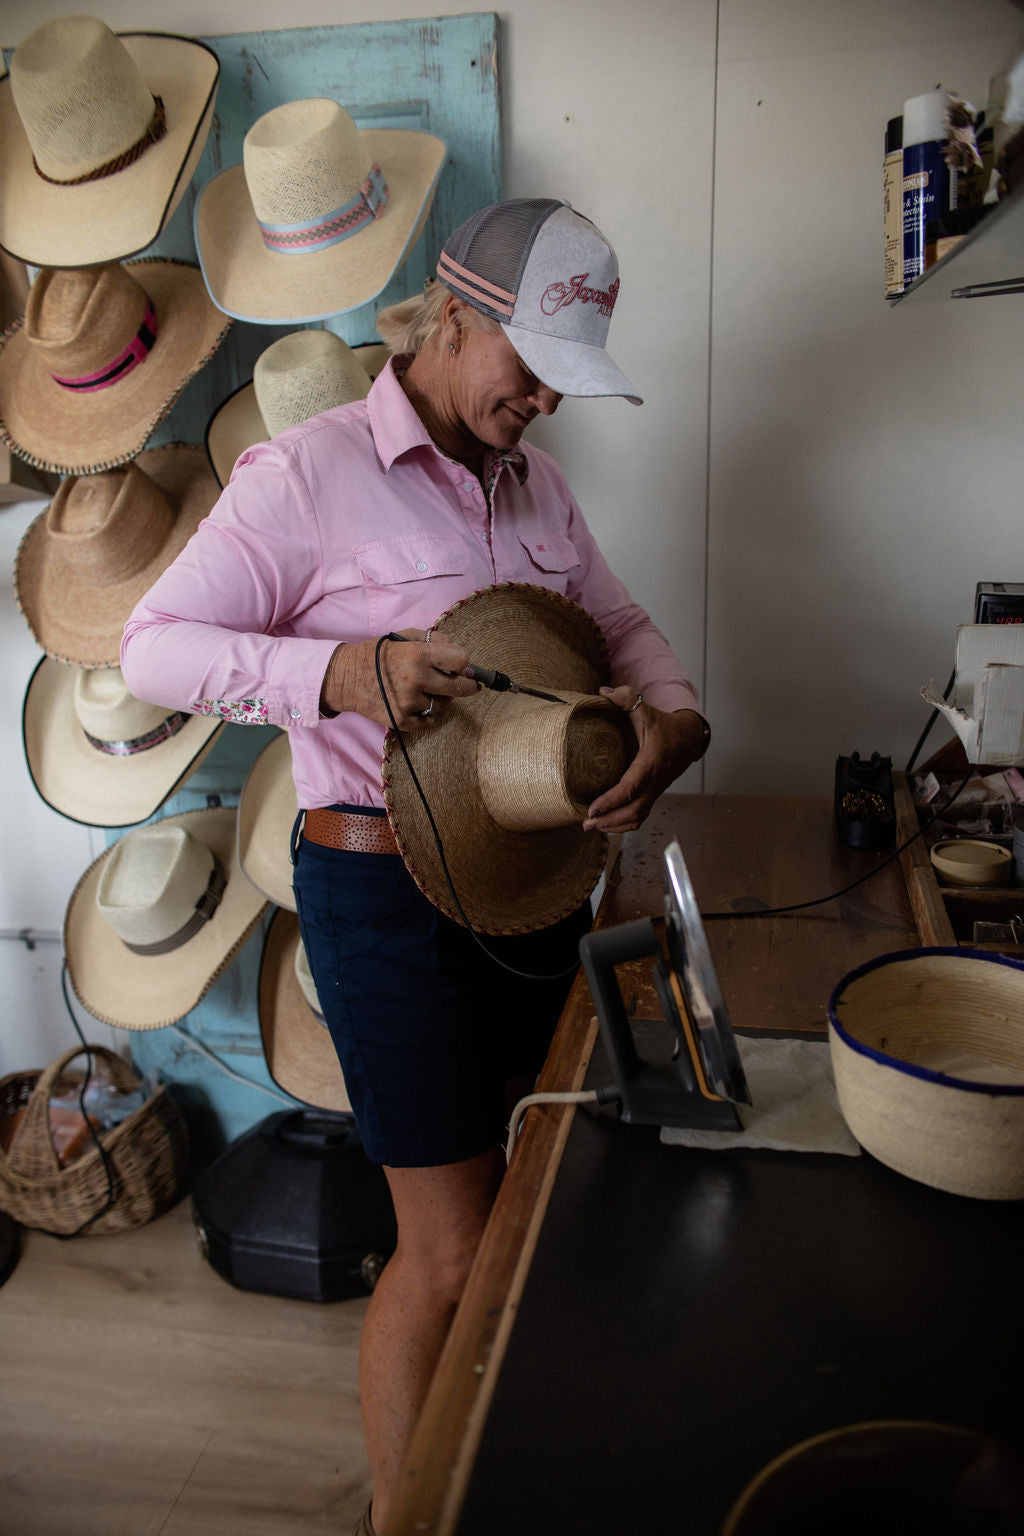 Jaxonbilt_Hats_are_Australian_made_palm_leaf_hats_and_crossbred_hats_for_cowgirls_and_cowboys_with_wide_brims_for_sun_protection_personal_hats_with_a_feminine_touch_or_for_a_masculine_look_all_is_achievable